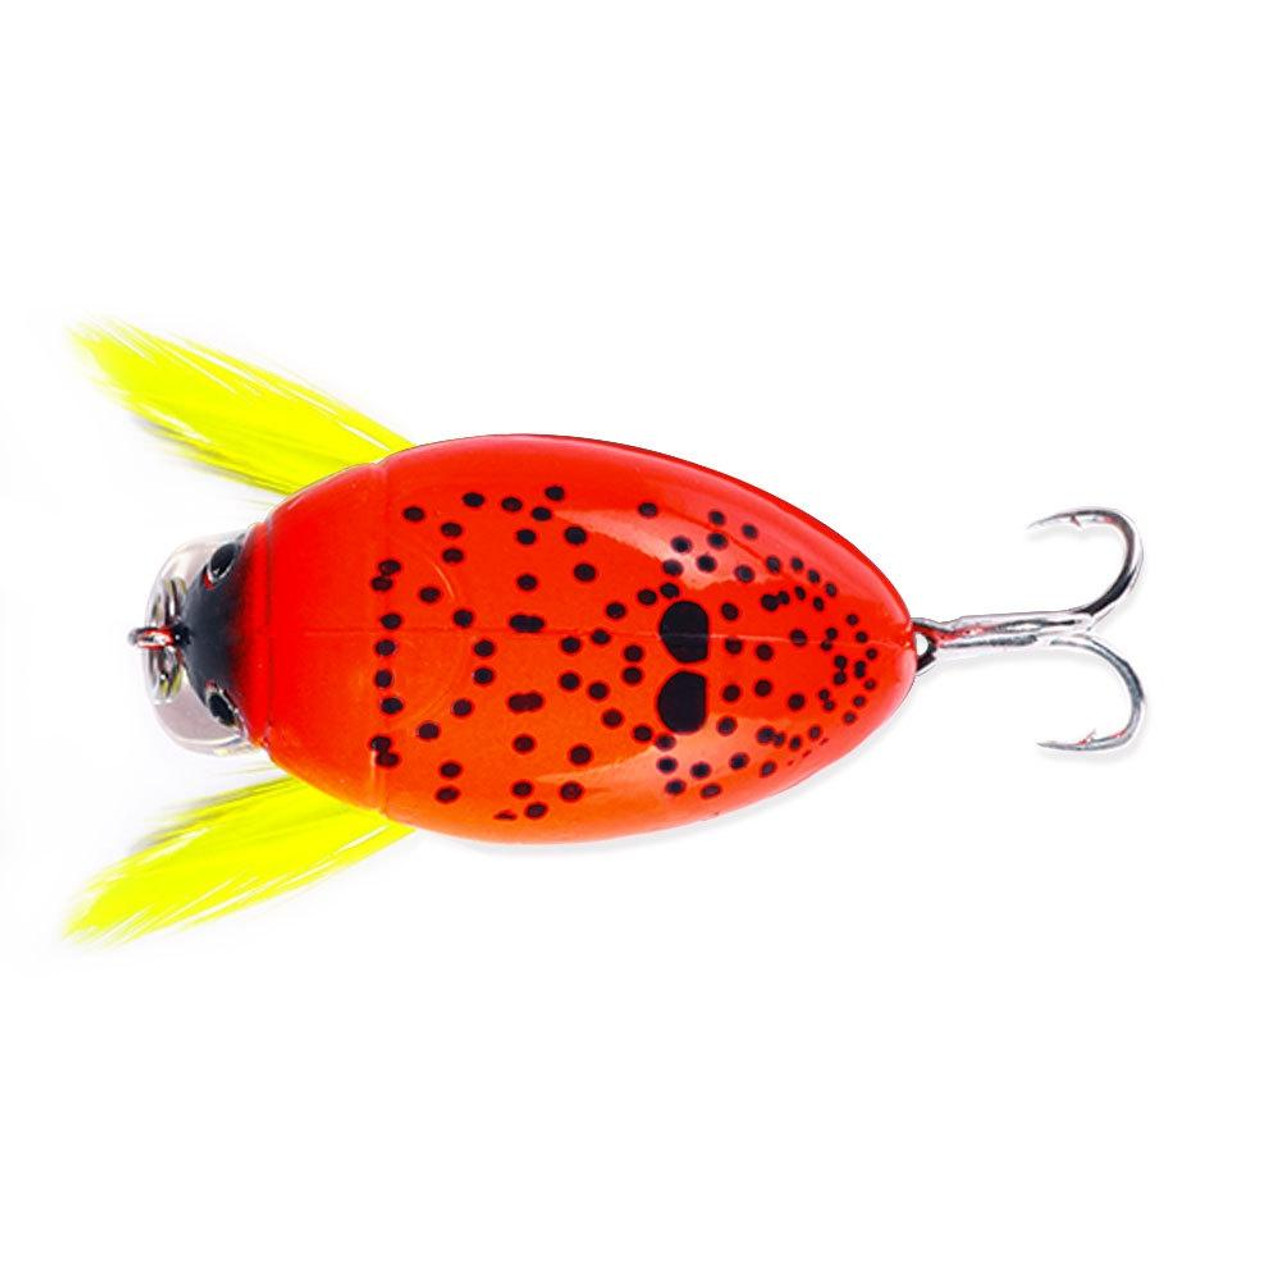 HENGJIA Insect Floating Water Bionic Bait Beetle Water Surface Bass Tap  Fake Bait, Color: 7, snatcher